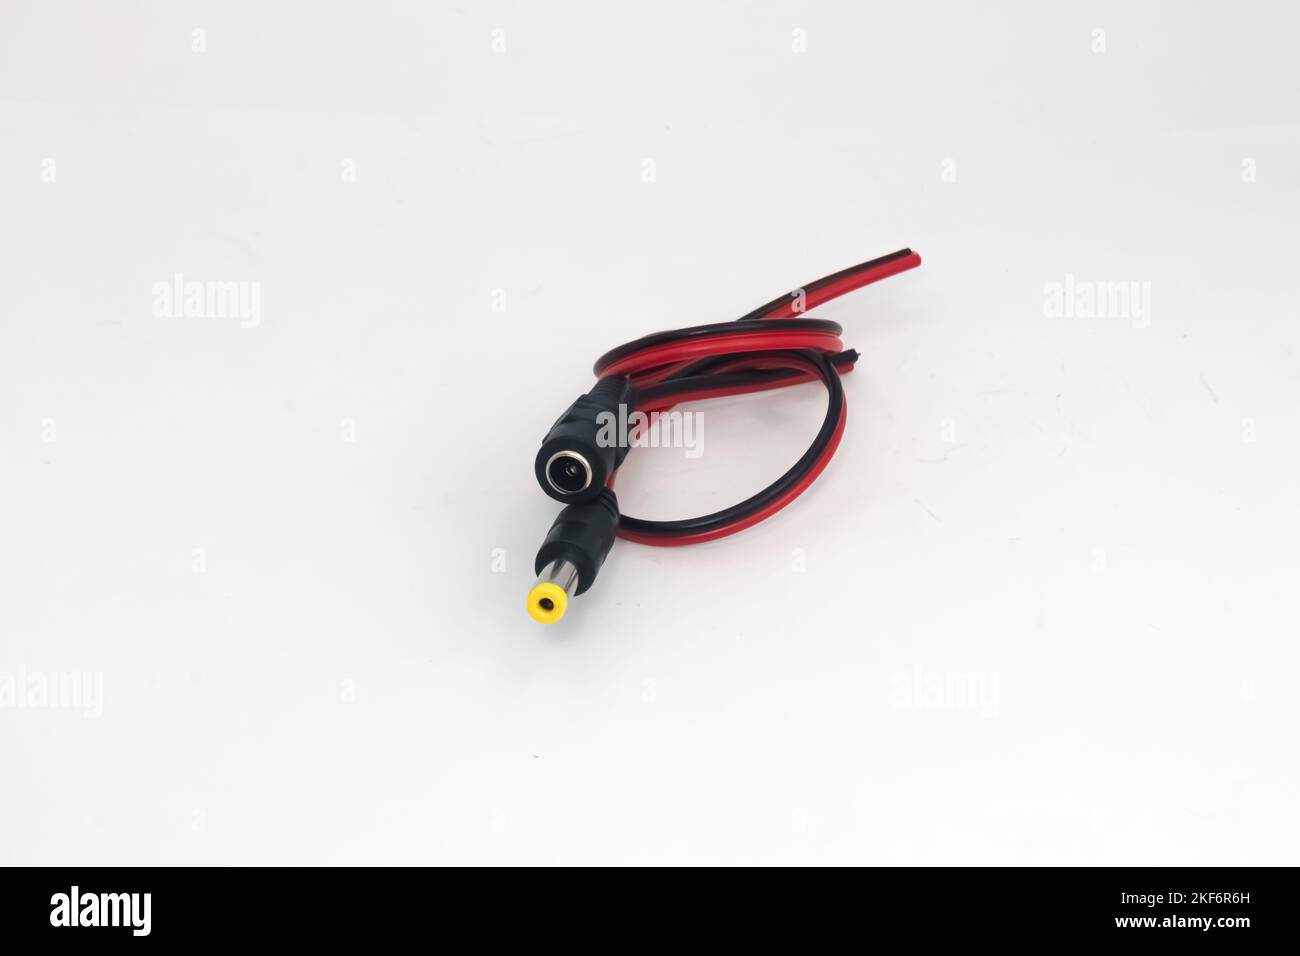 DC 12V male and female connector cables on a white background. Electronic parts used by hobbyists as connectors used to connect the power supply. Stock Photo